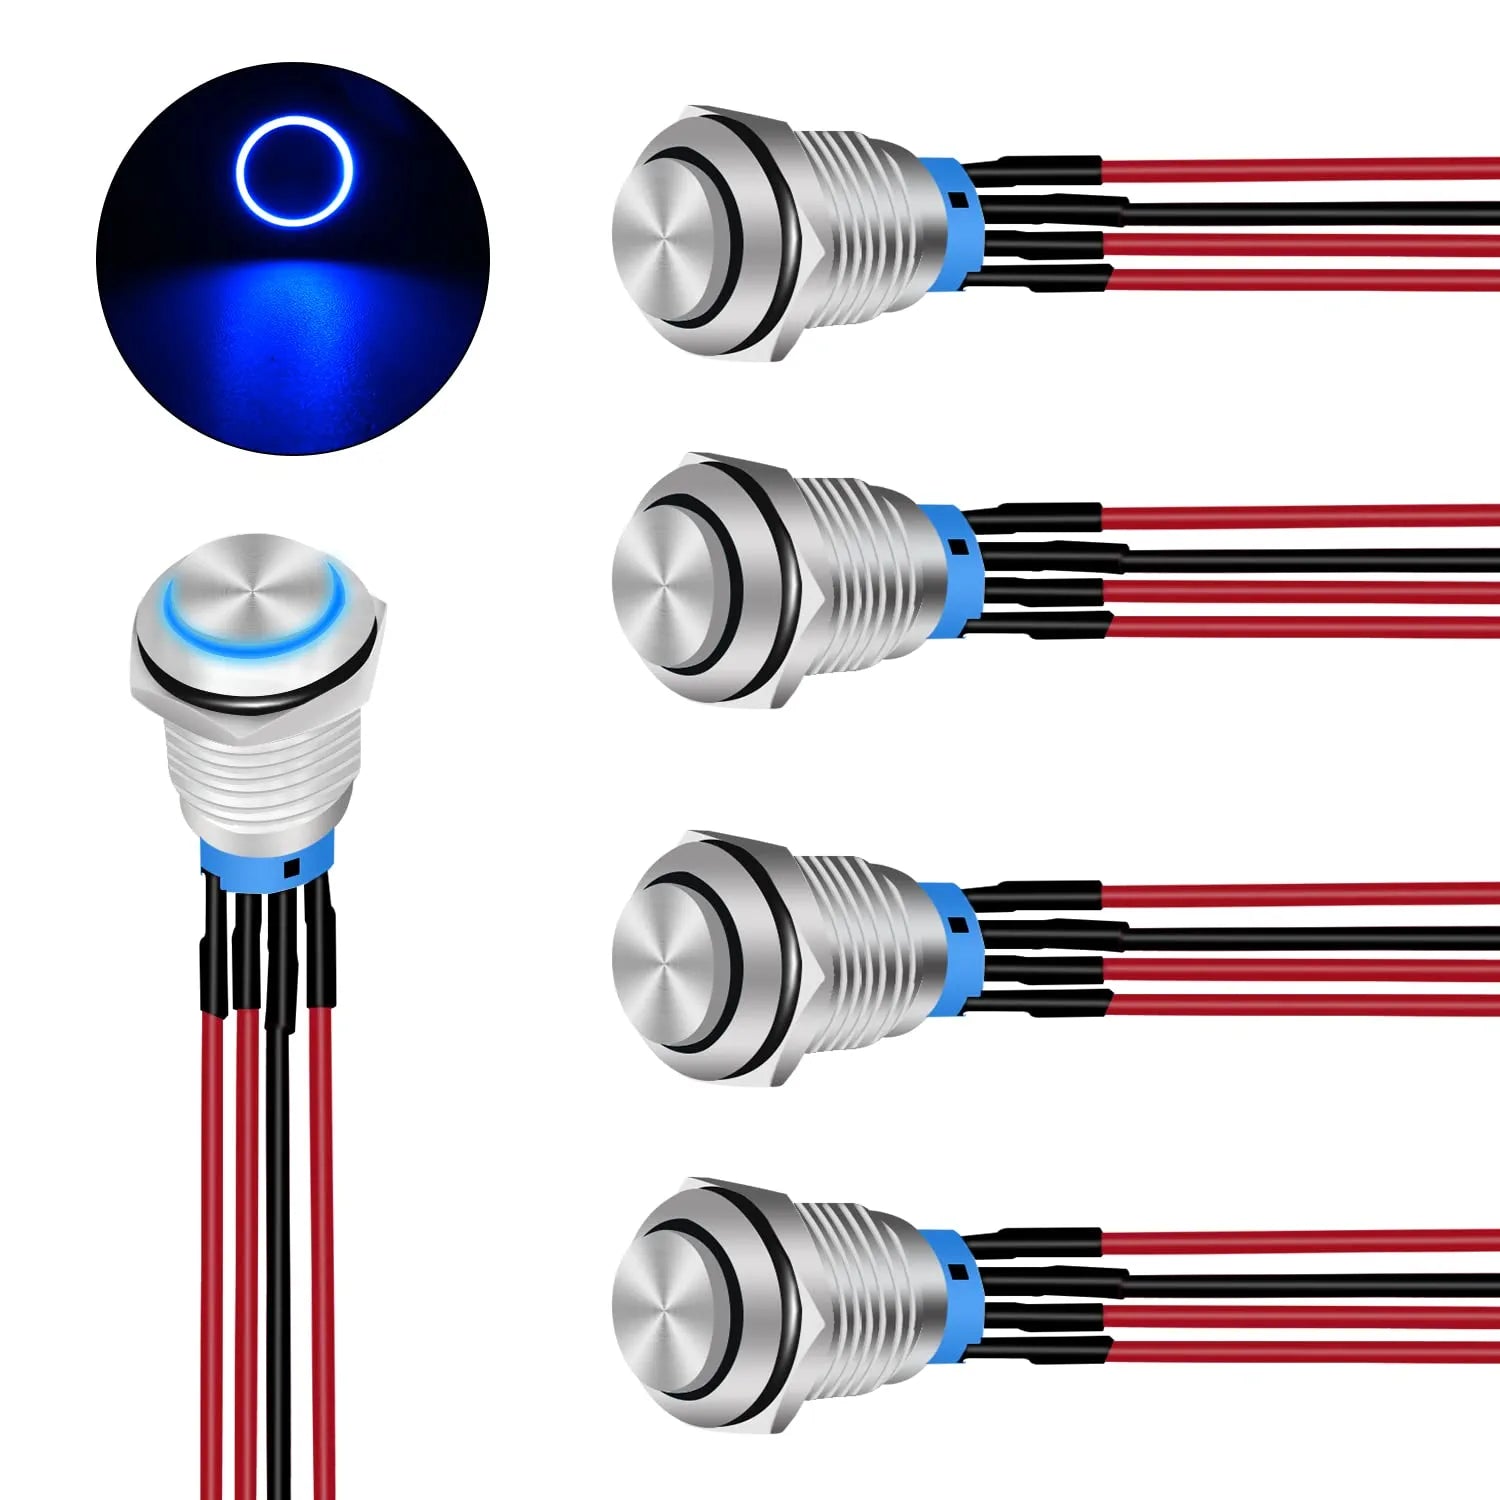 12mm 12V Waterproof ON Off Latching Push Button Switch Nilight